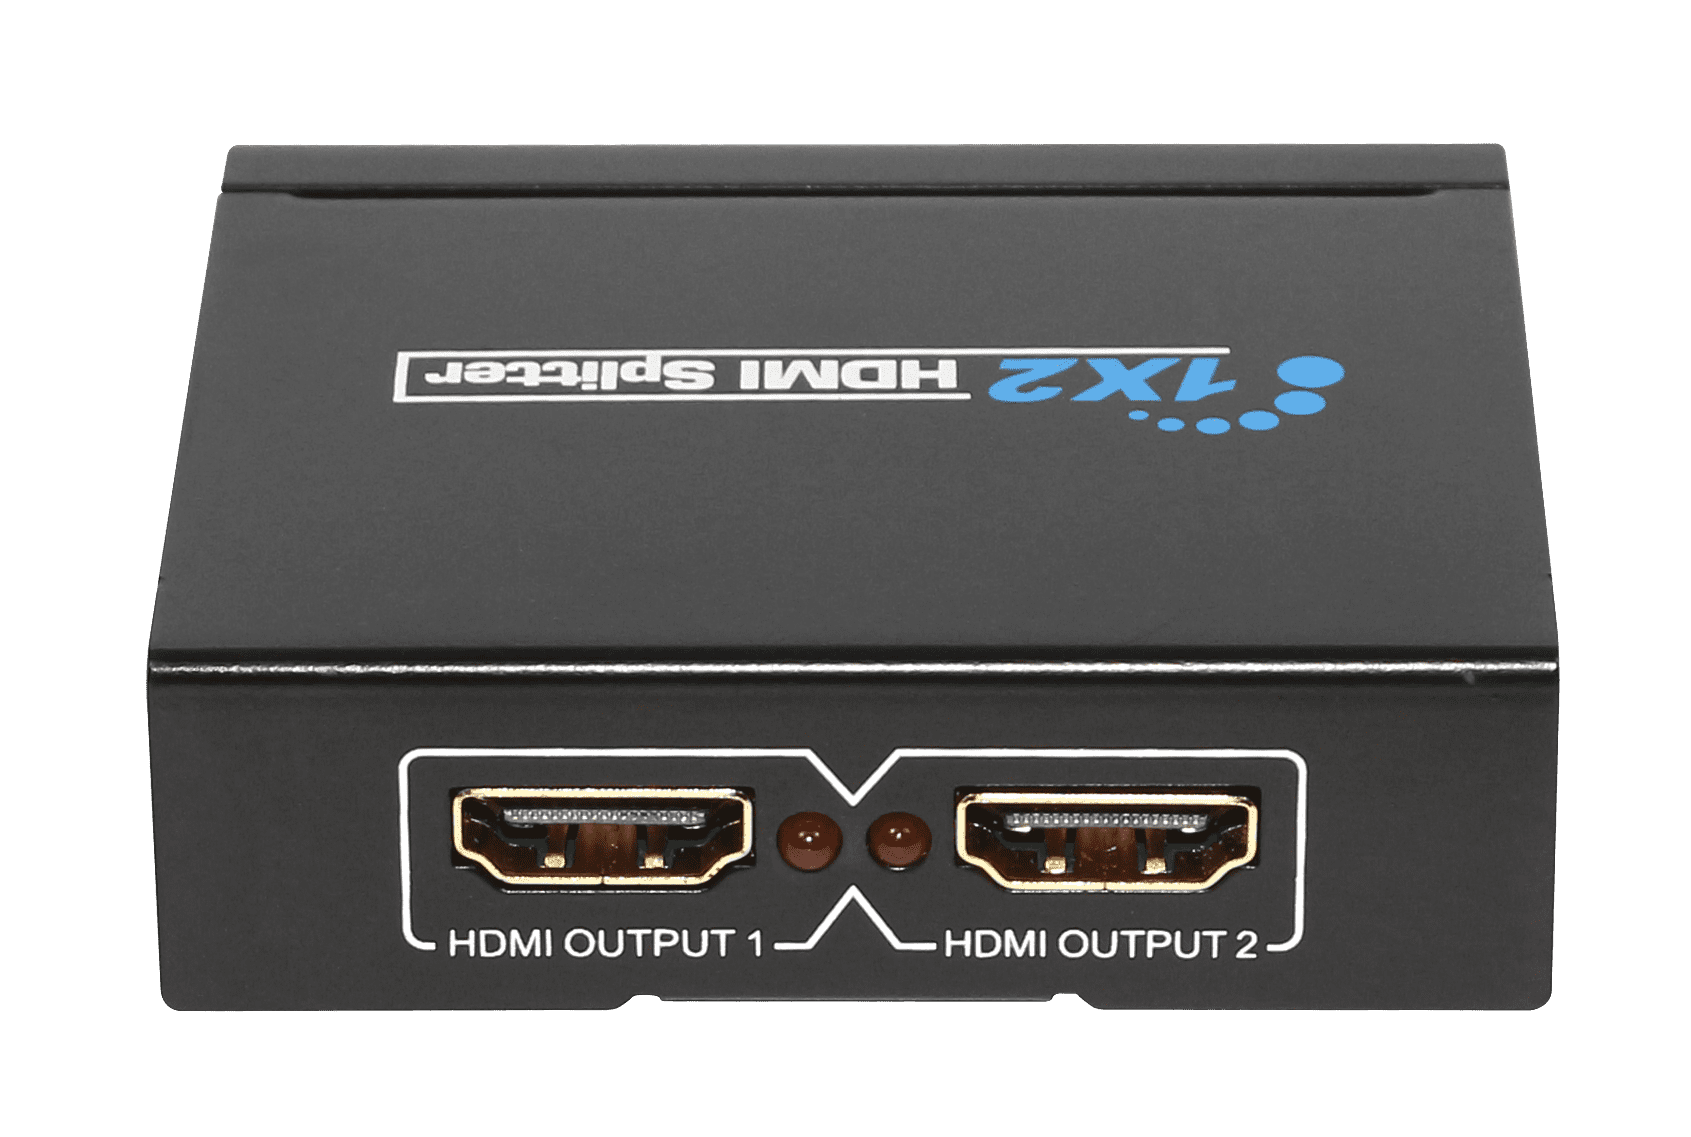 hdcvt-1x2-hdmi-1.4-splitter-supports-hdcp1.4-and-edid-2-image